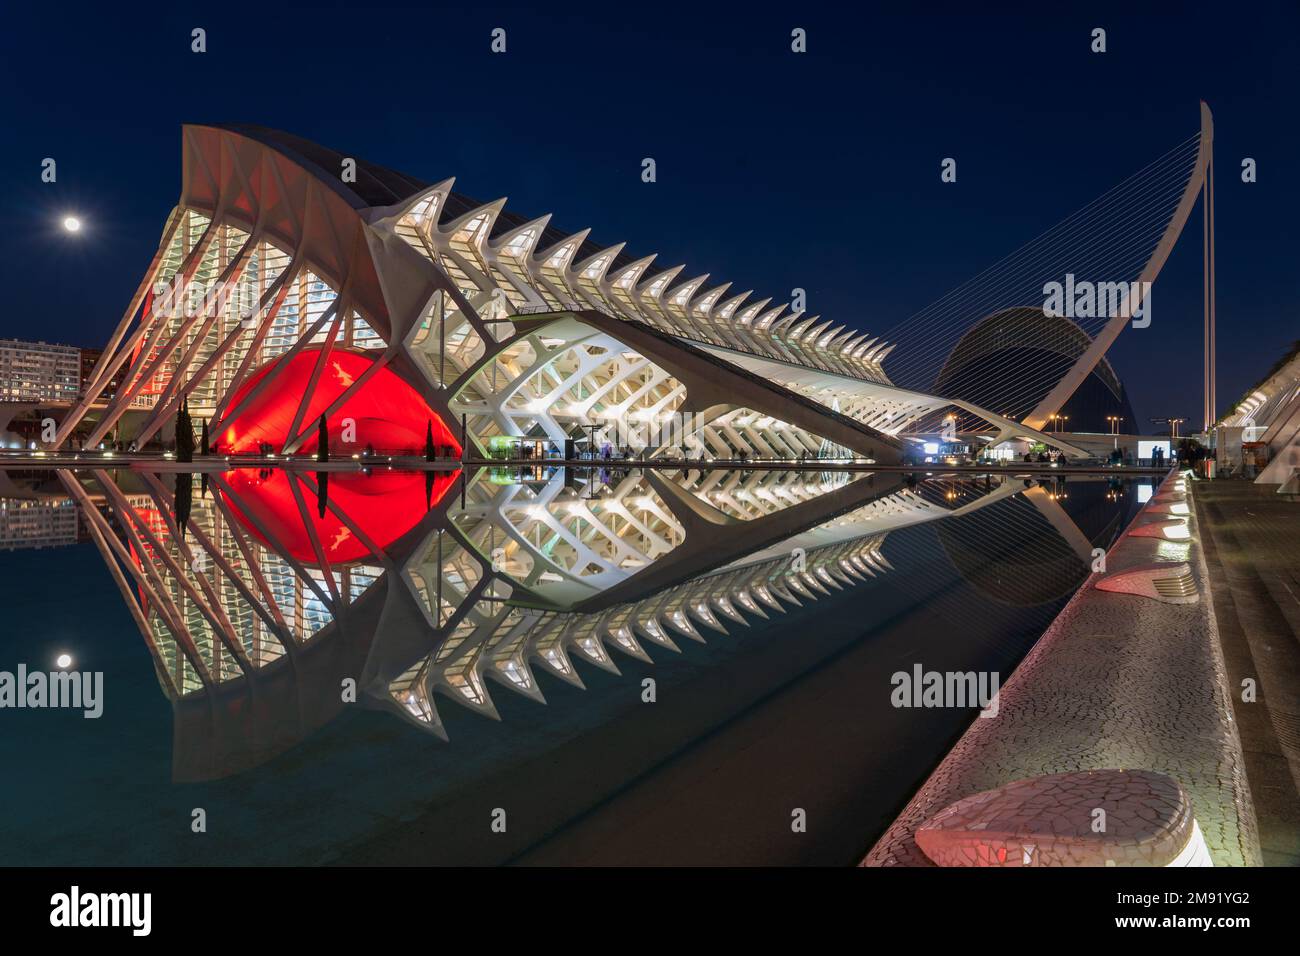 The Science Museum in The City of Arts and Sciences of Valencia was  designed by Spanish architect Santiago Calatrava. It resembles a fish skeleton. Stock Photo